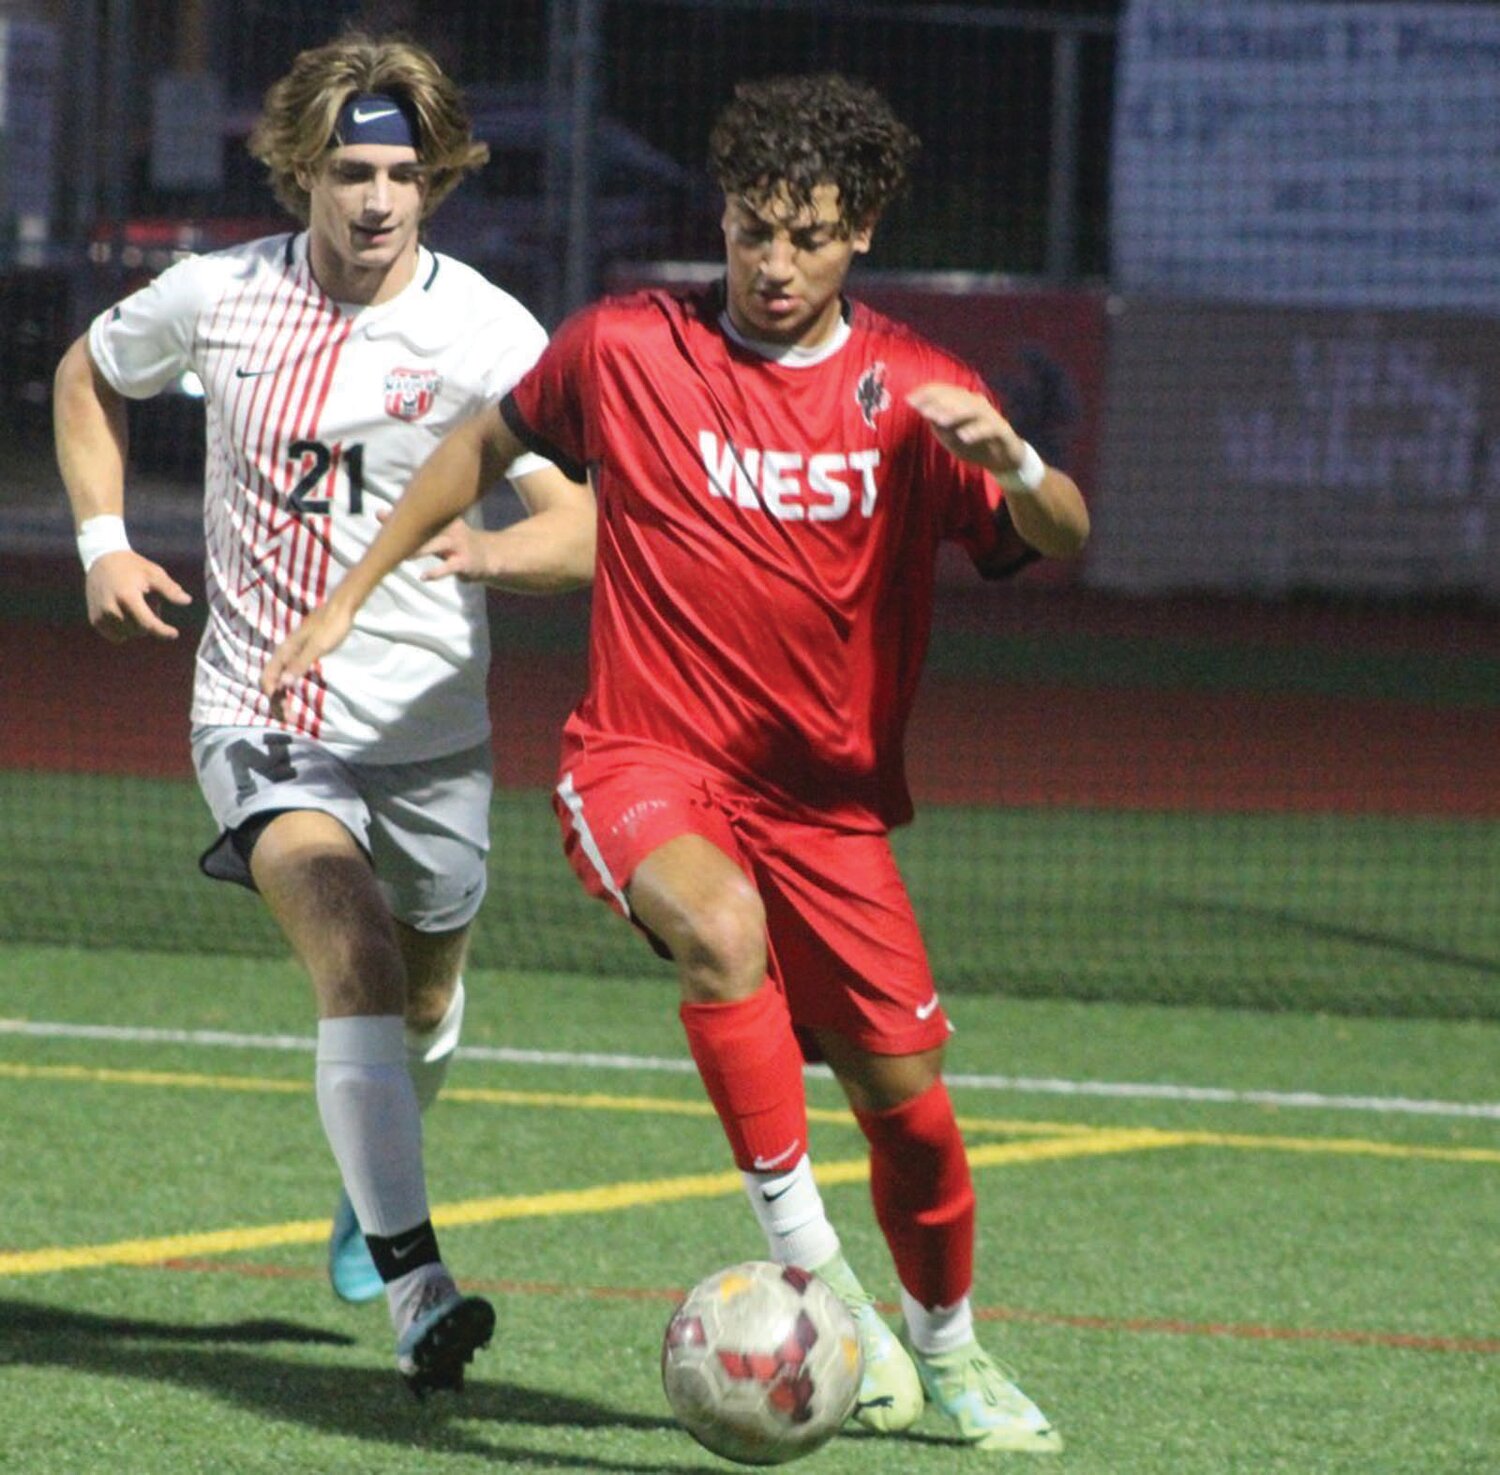 ATHLETE OF THE WEEK: SAM NAIEFEH, WEST: The Cranston Herald’s Athlete of the Week is West soccer player Sam Naiefeh, who has been a force on offense for the Falcons this season. Through five games, Naiefeh leads the team with five goals, accounting for half the club’s points.